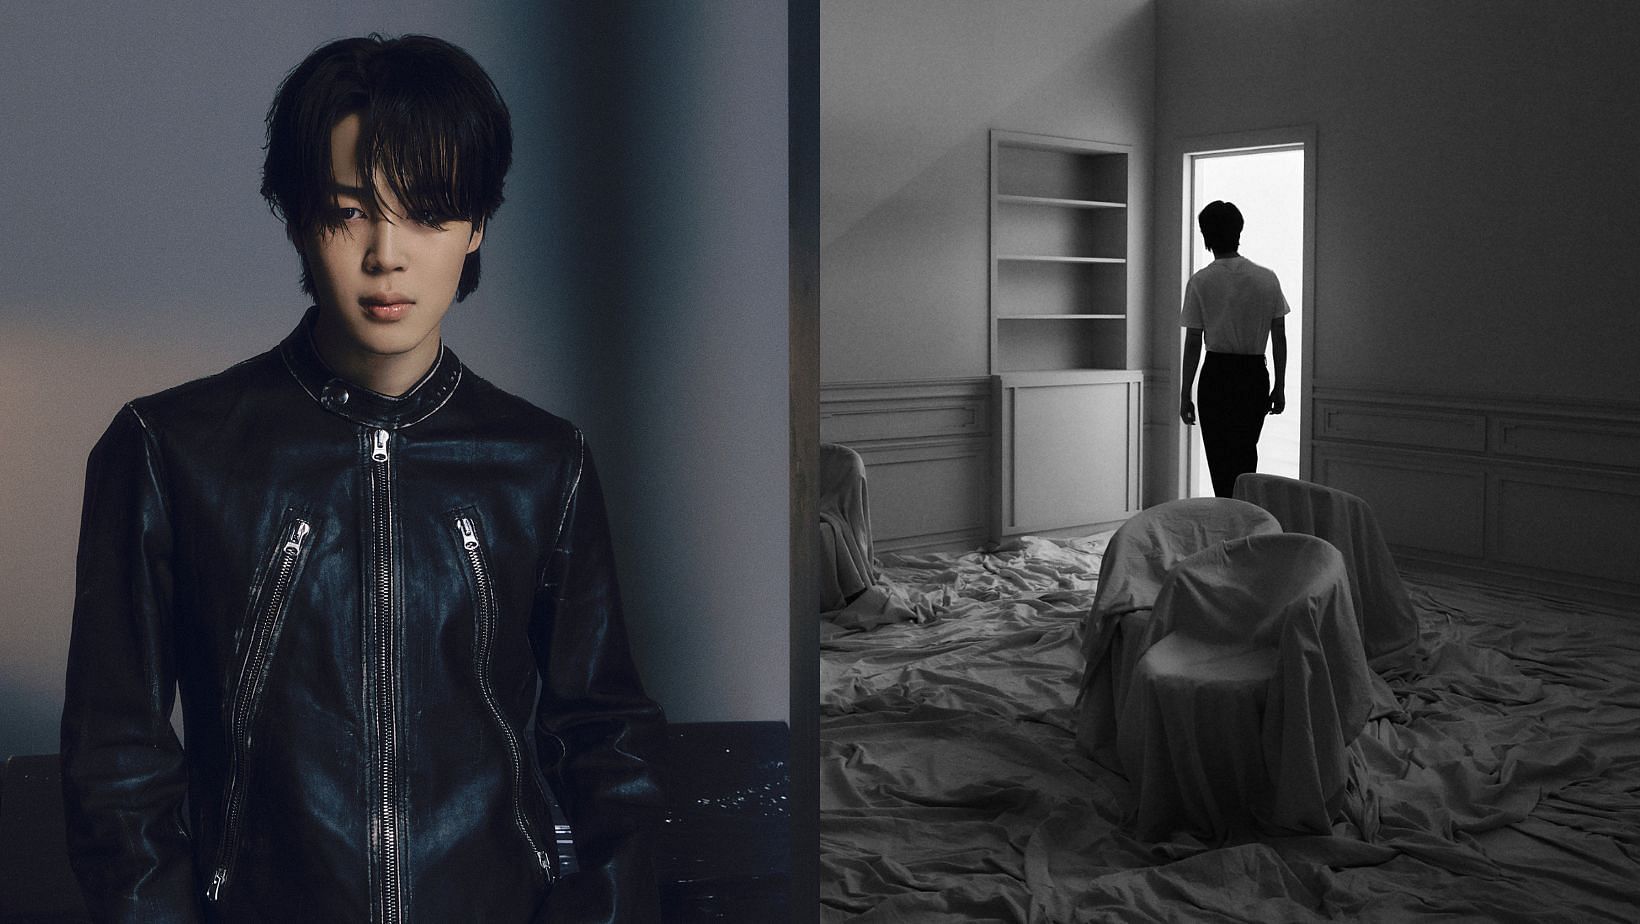 BTS Jimin&rsquo;s &ldquo;Interlude: Dive&rdquo; becomes the first and fastest interlude by a K-act to reach 100 million Spotify streams. (Images via X/@BIGHIT_MUSIC)